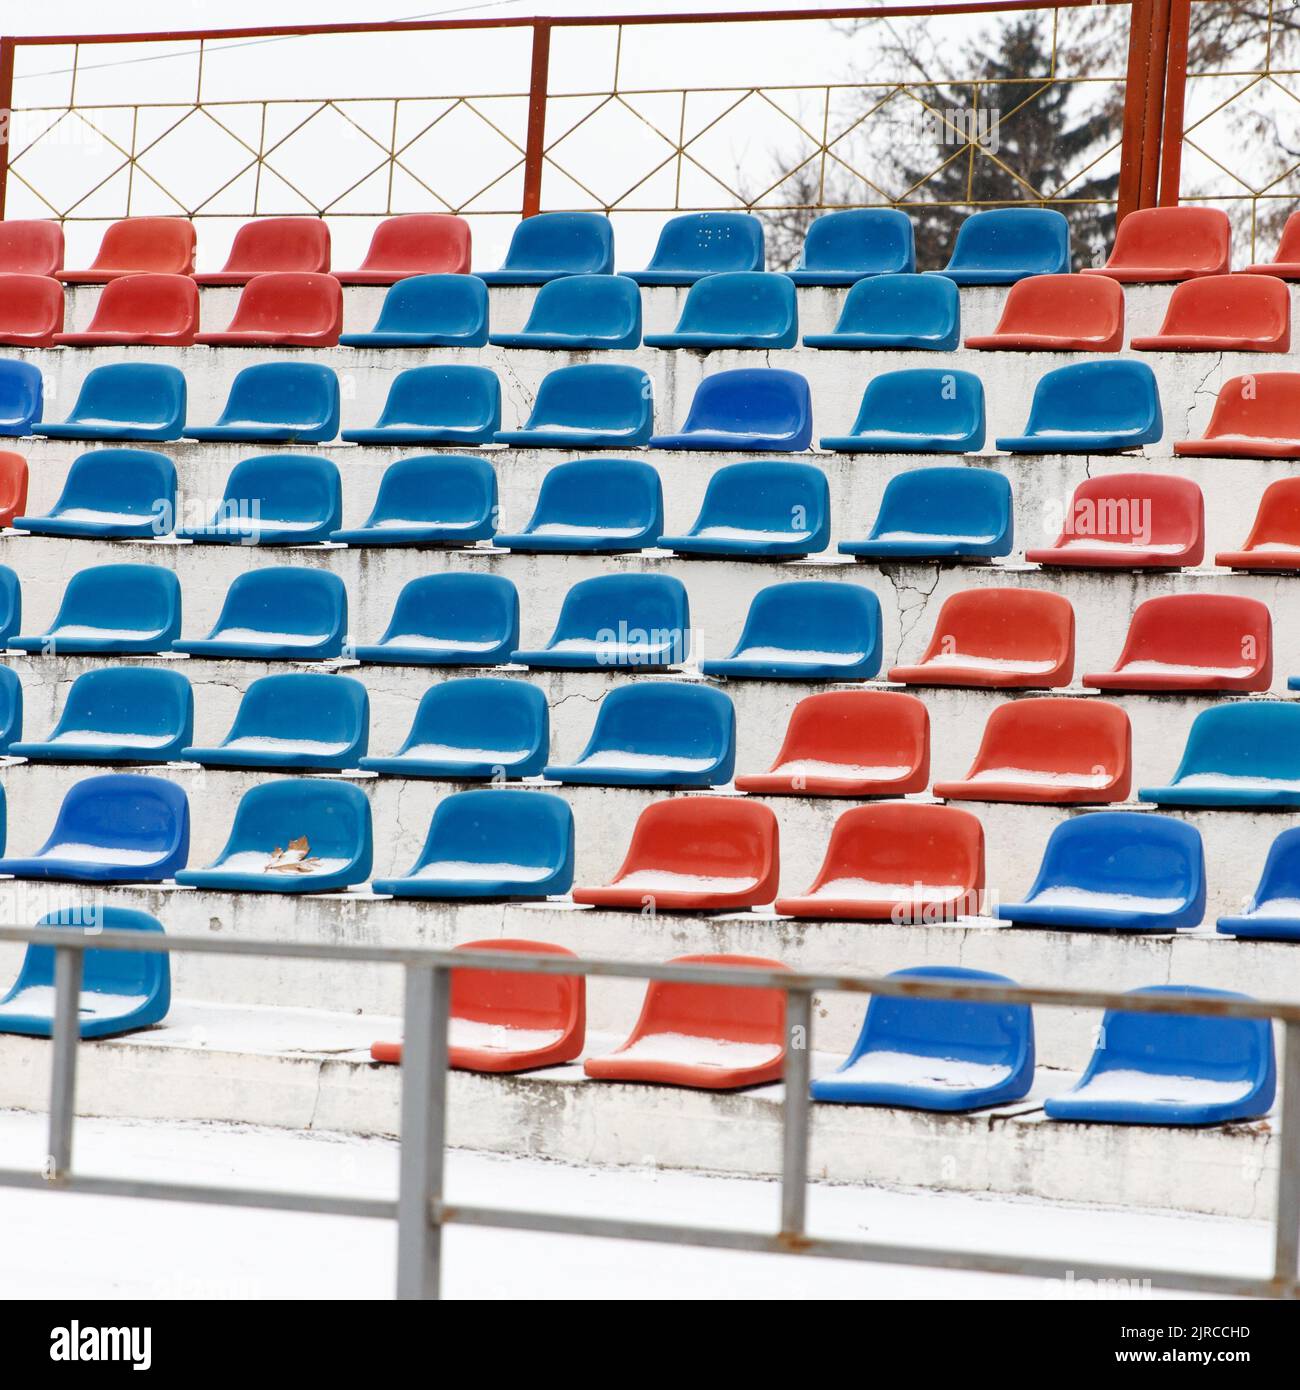 Places where fans sit, plastic red and blue chairs in a football stadium, in winter in snowy weather Stock Photo